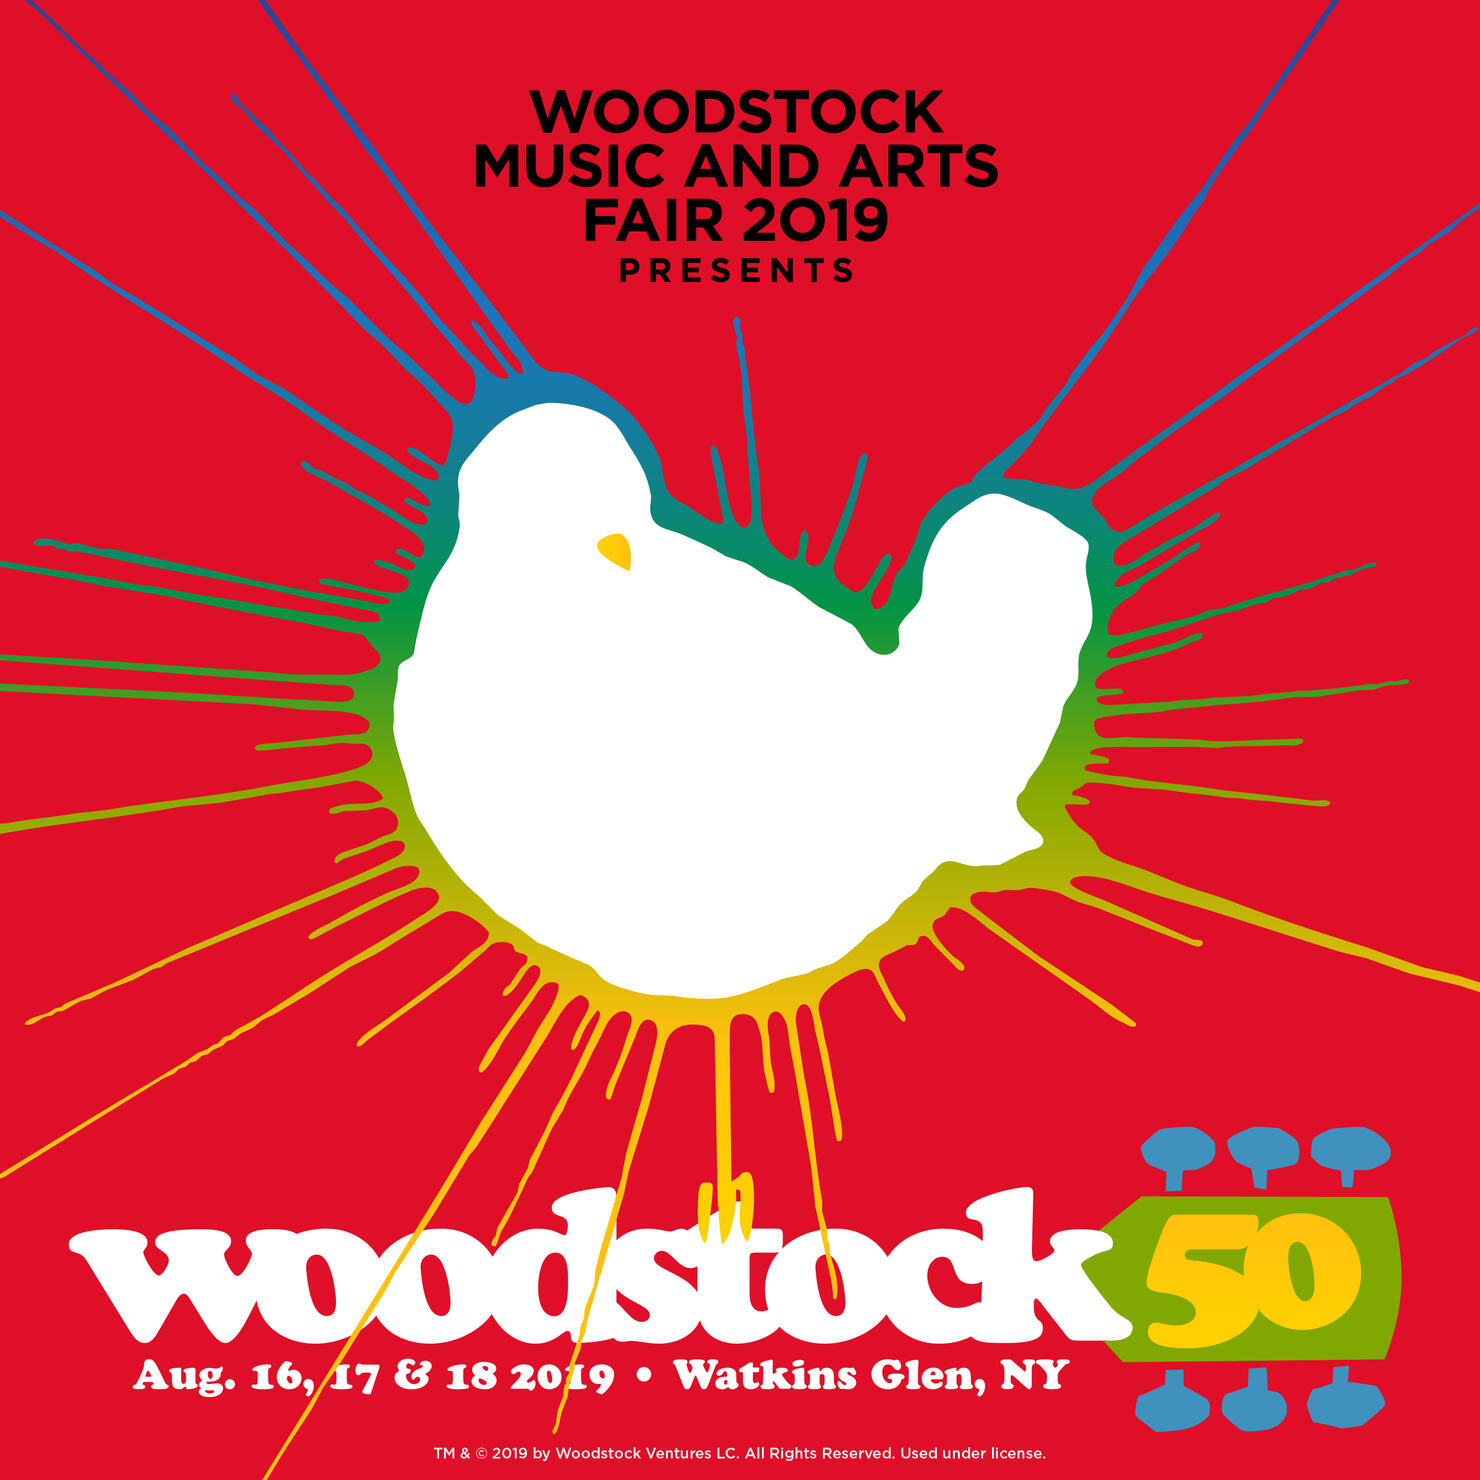 Woodstock 50 Is Coming This Summer